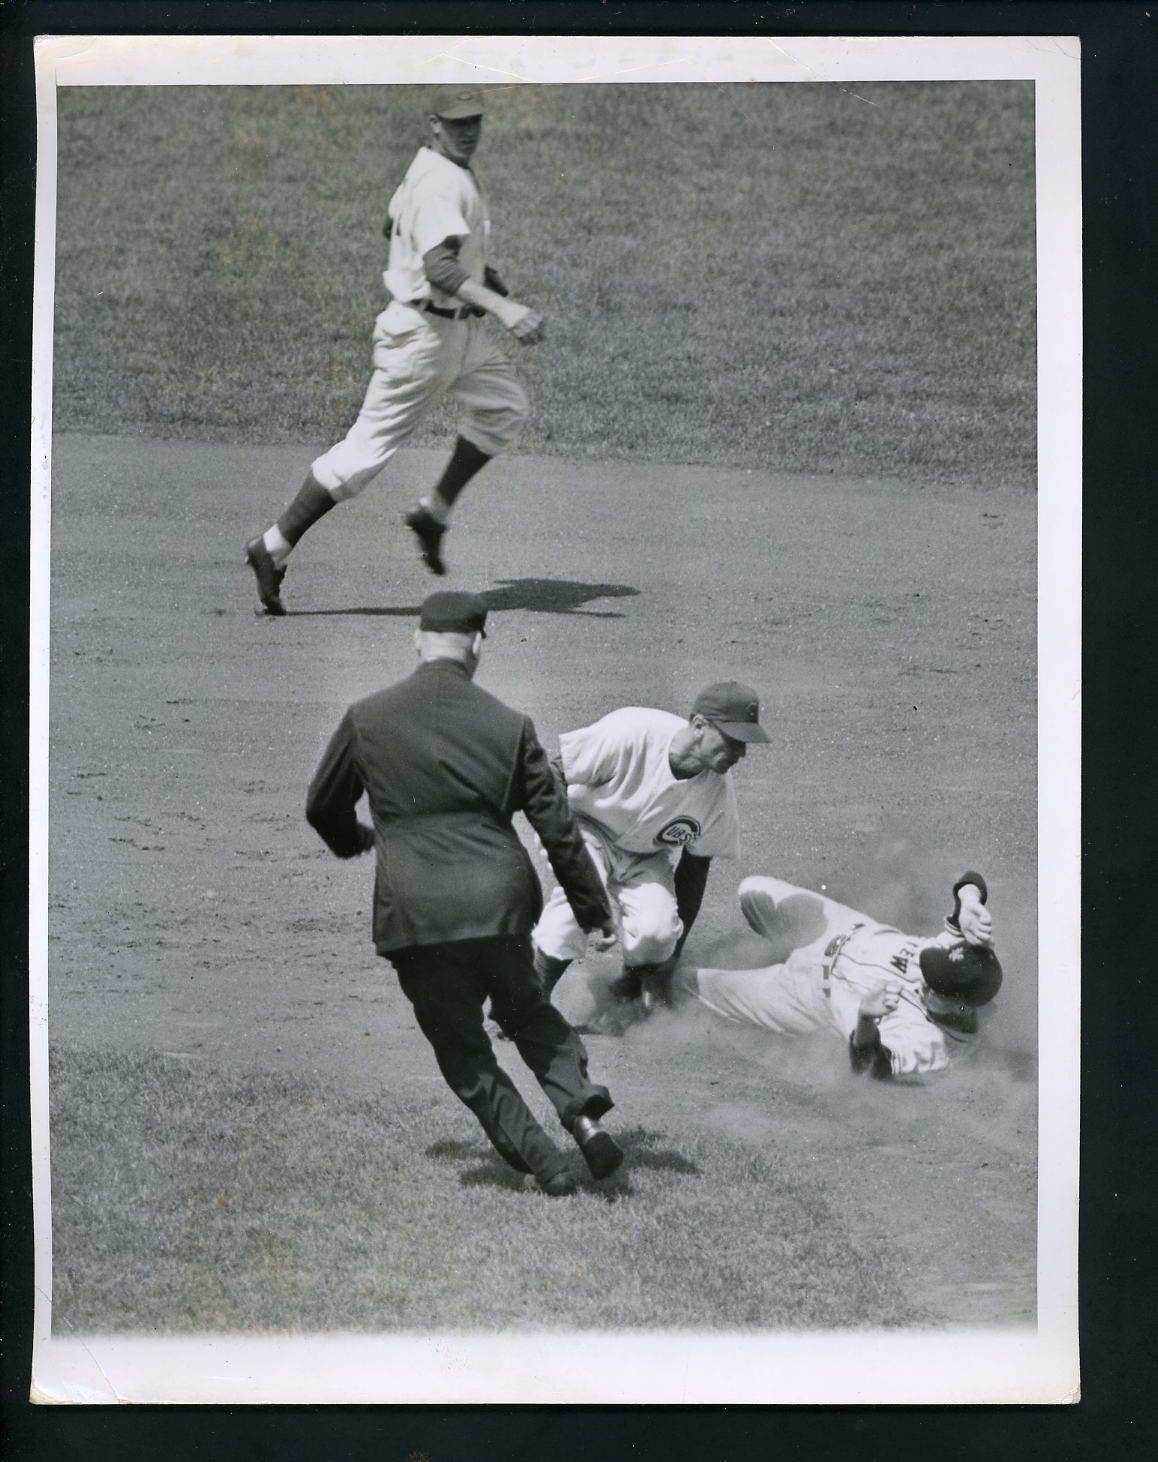 Don Johnson & Bill Rigney Lennie Merullo 1957 Press Photo Poster painting Chicago Cubs Giants